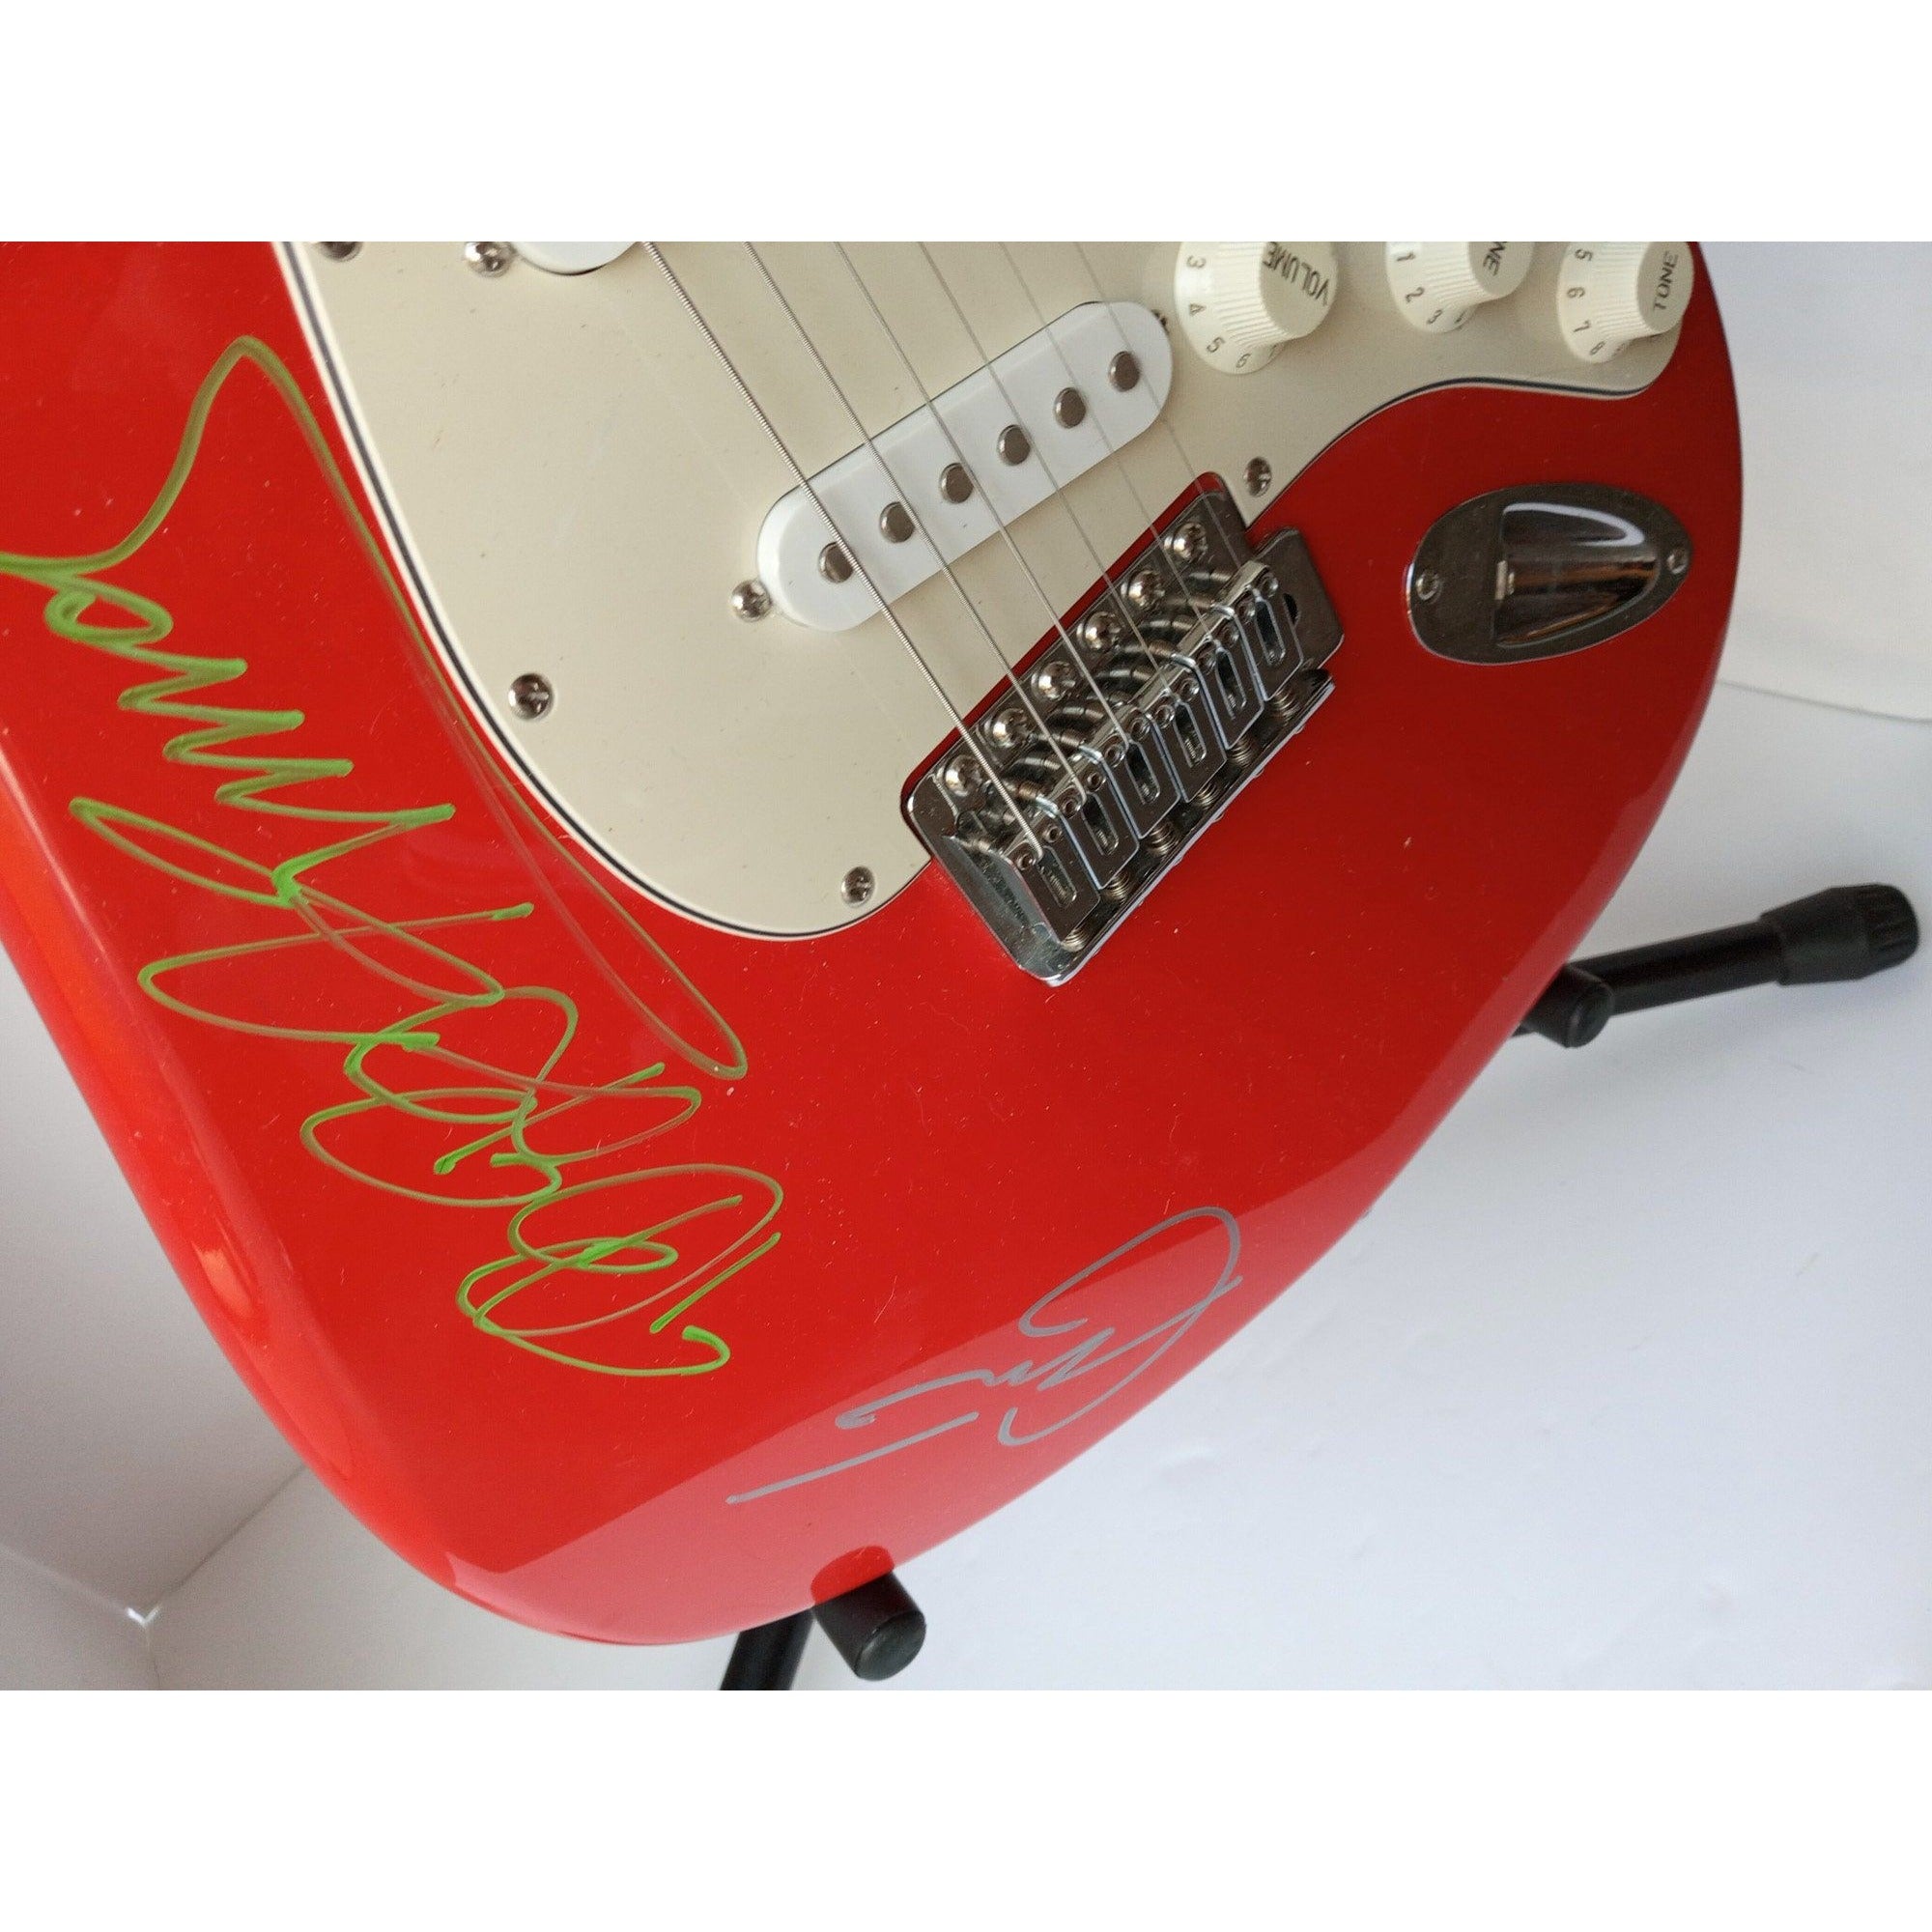 Eric Clapton, Chuck Berry, Bo Diddley, B.B. King, Fender electric guitar signed with proof